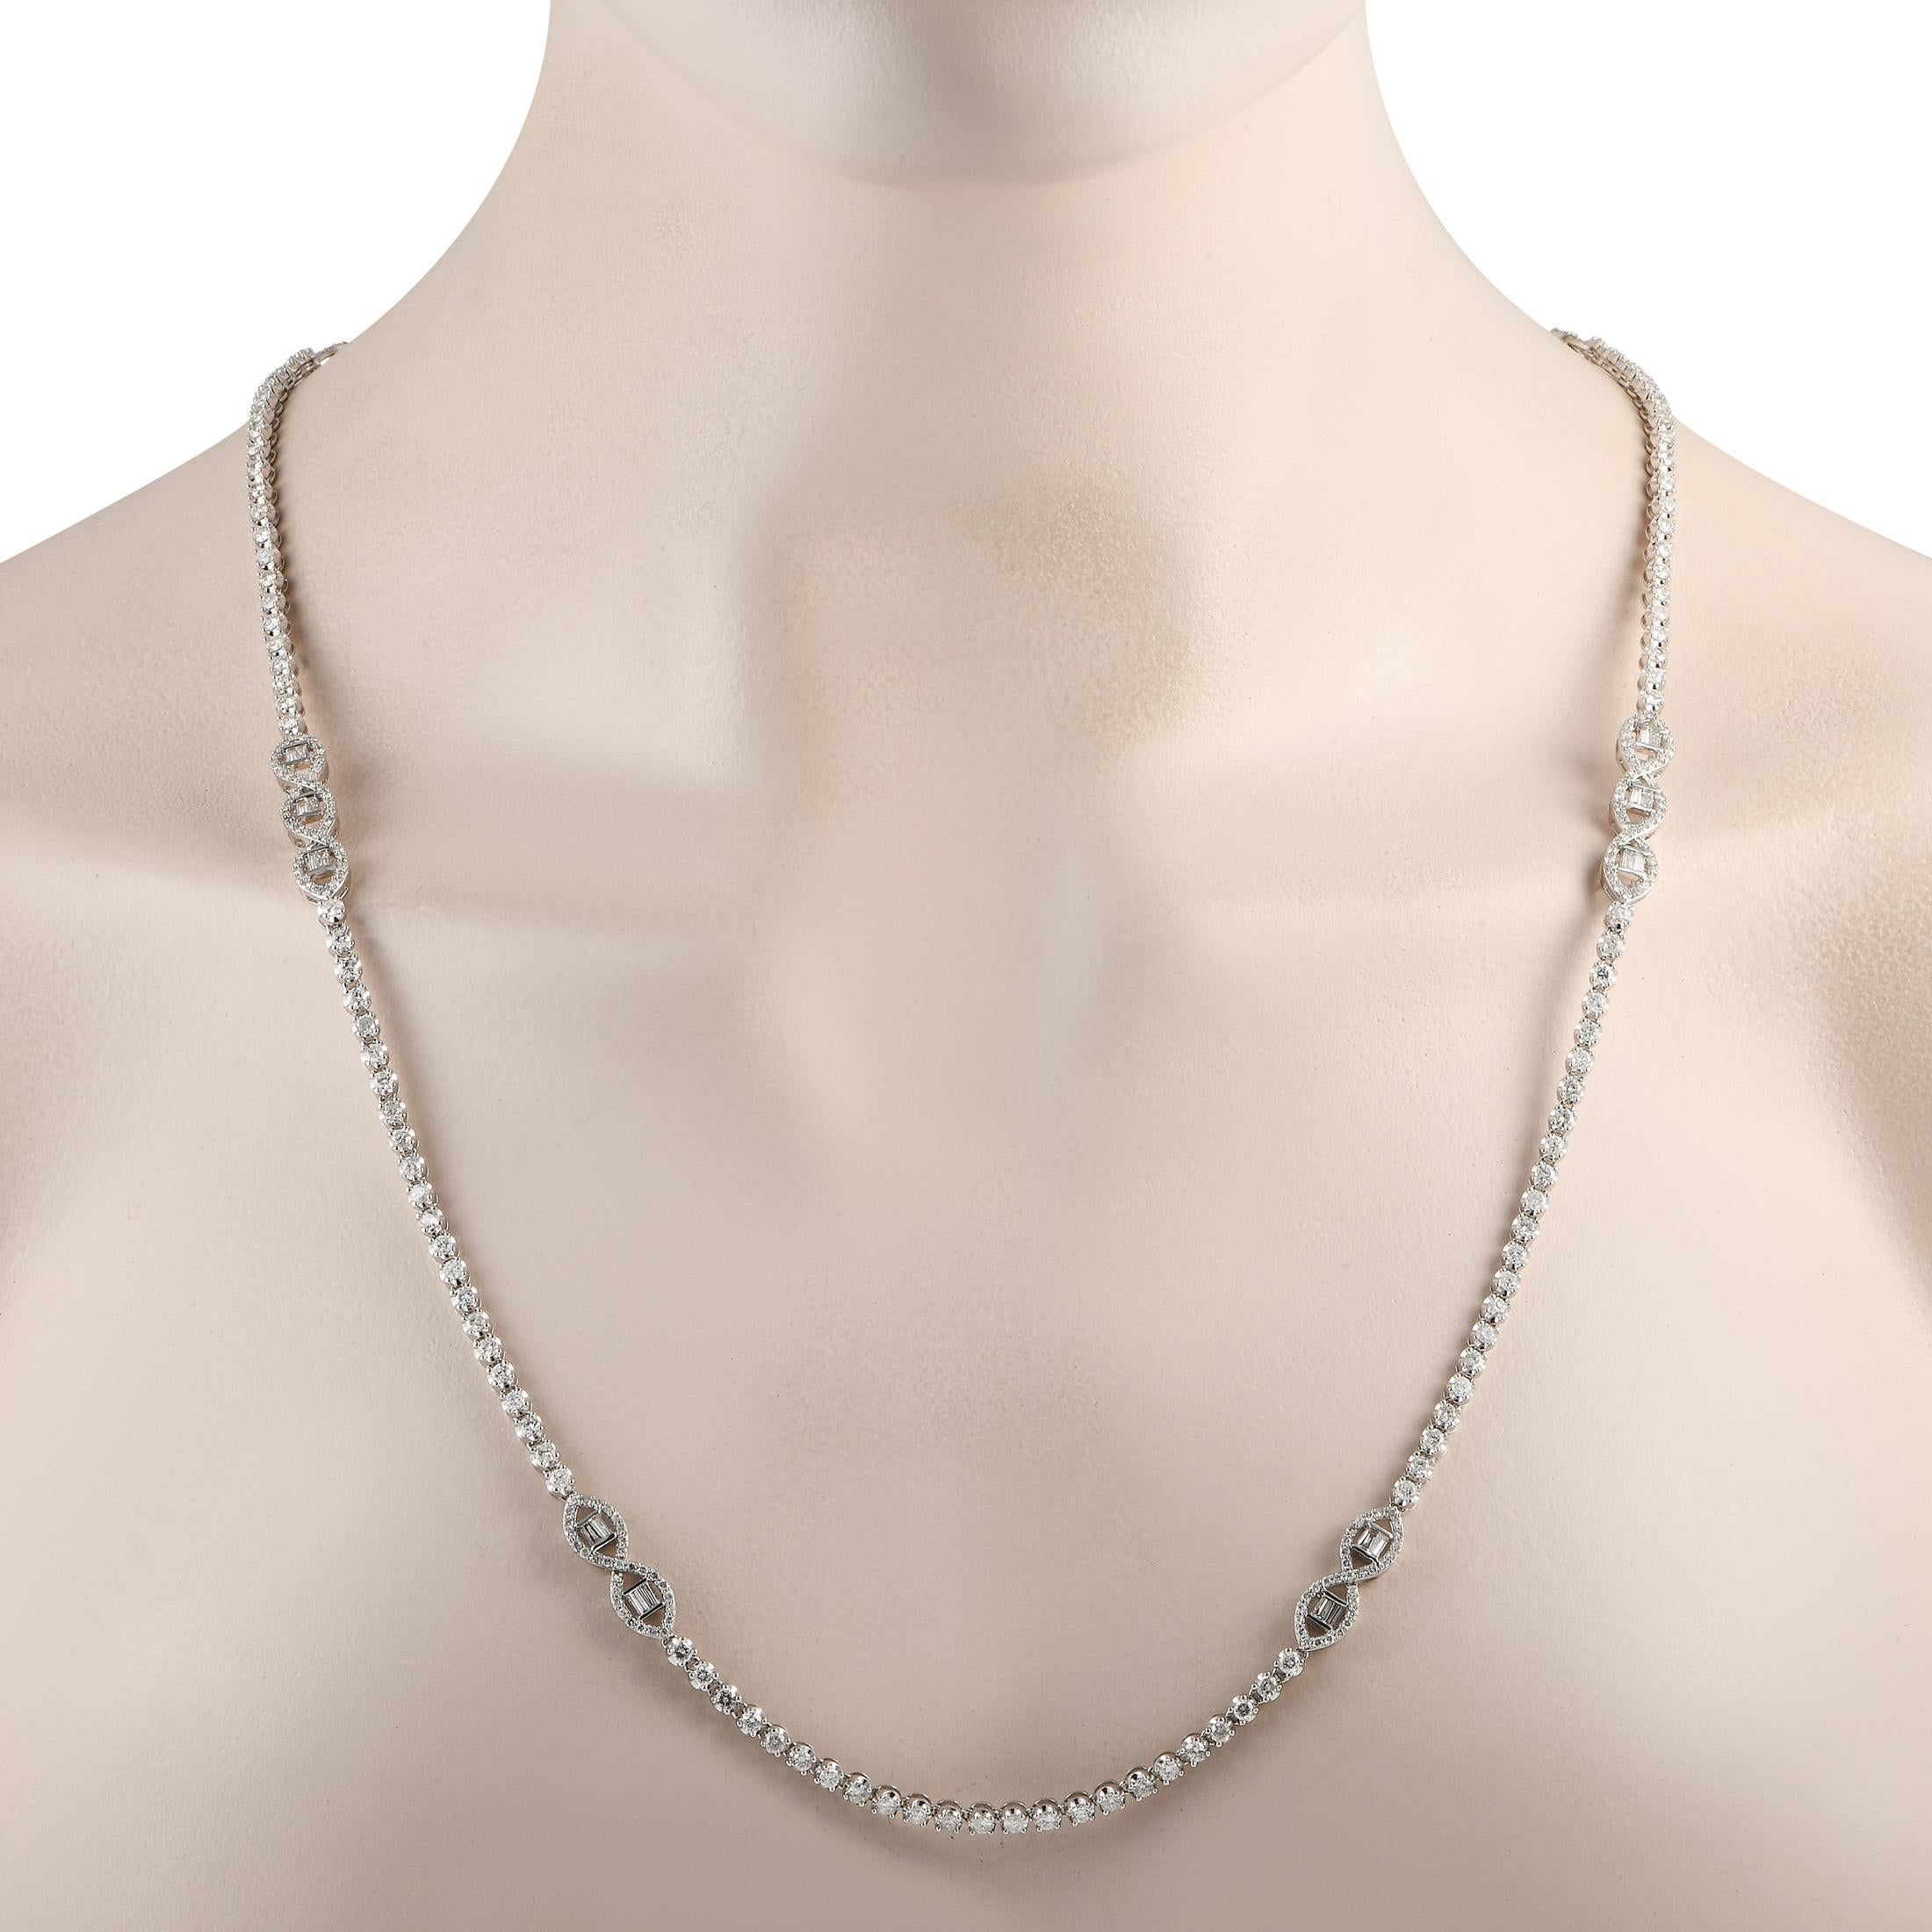 This luxurious 18K White Gold necklace will elevate any occasion. On this exquisite piece, Diamonds with a total weight of 10.80 carats effortlessly reflect light. It measures 14.0 long and comes complete with secure lobster clasp closure.This